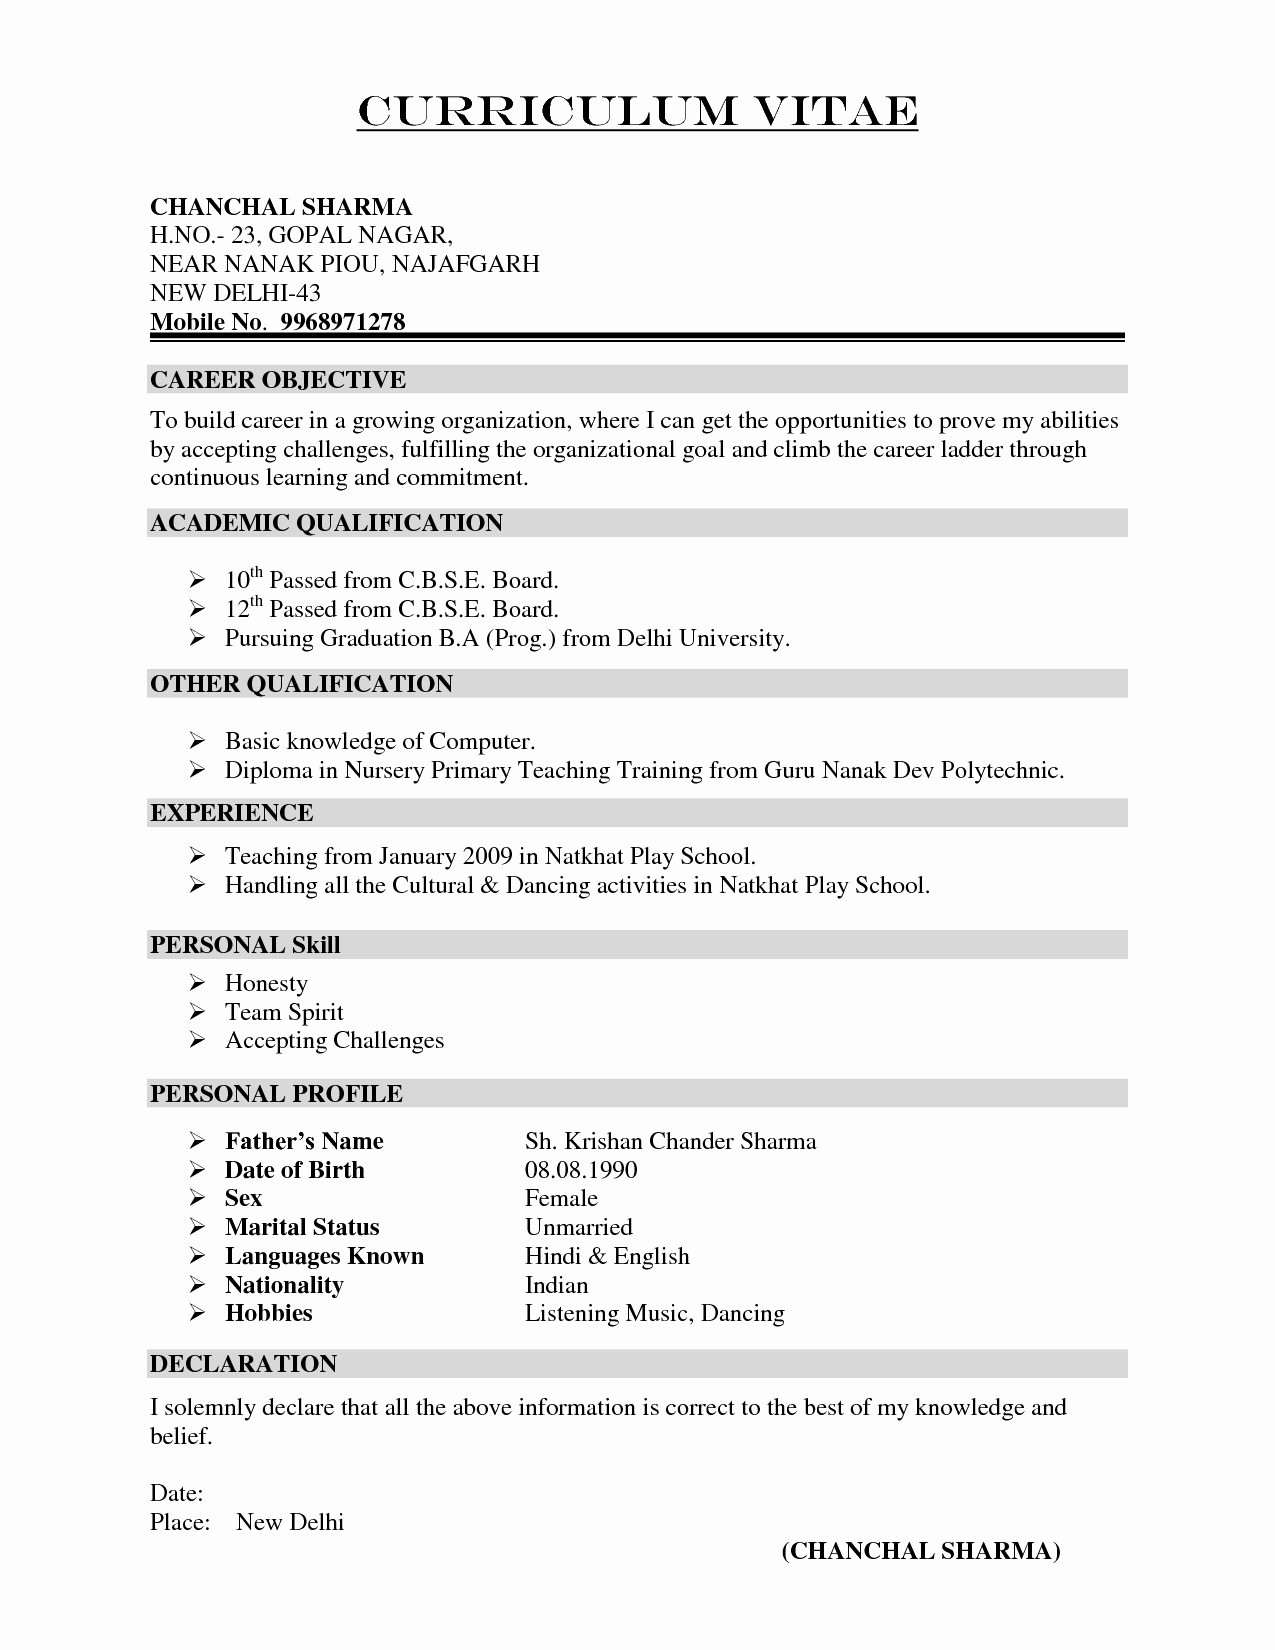 cover resume letter template Collection-New Resume Cover Letter formatted Resume 0d Email Resume Cover 10-n